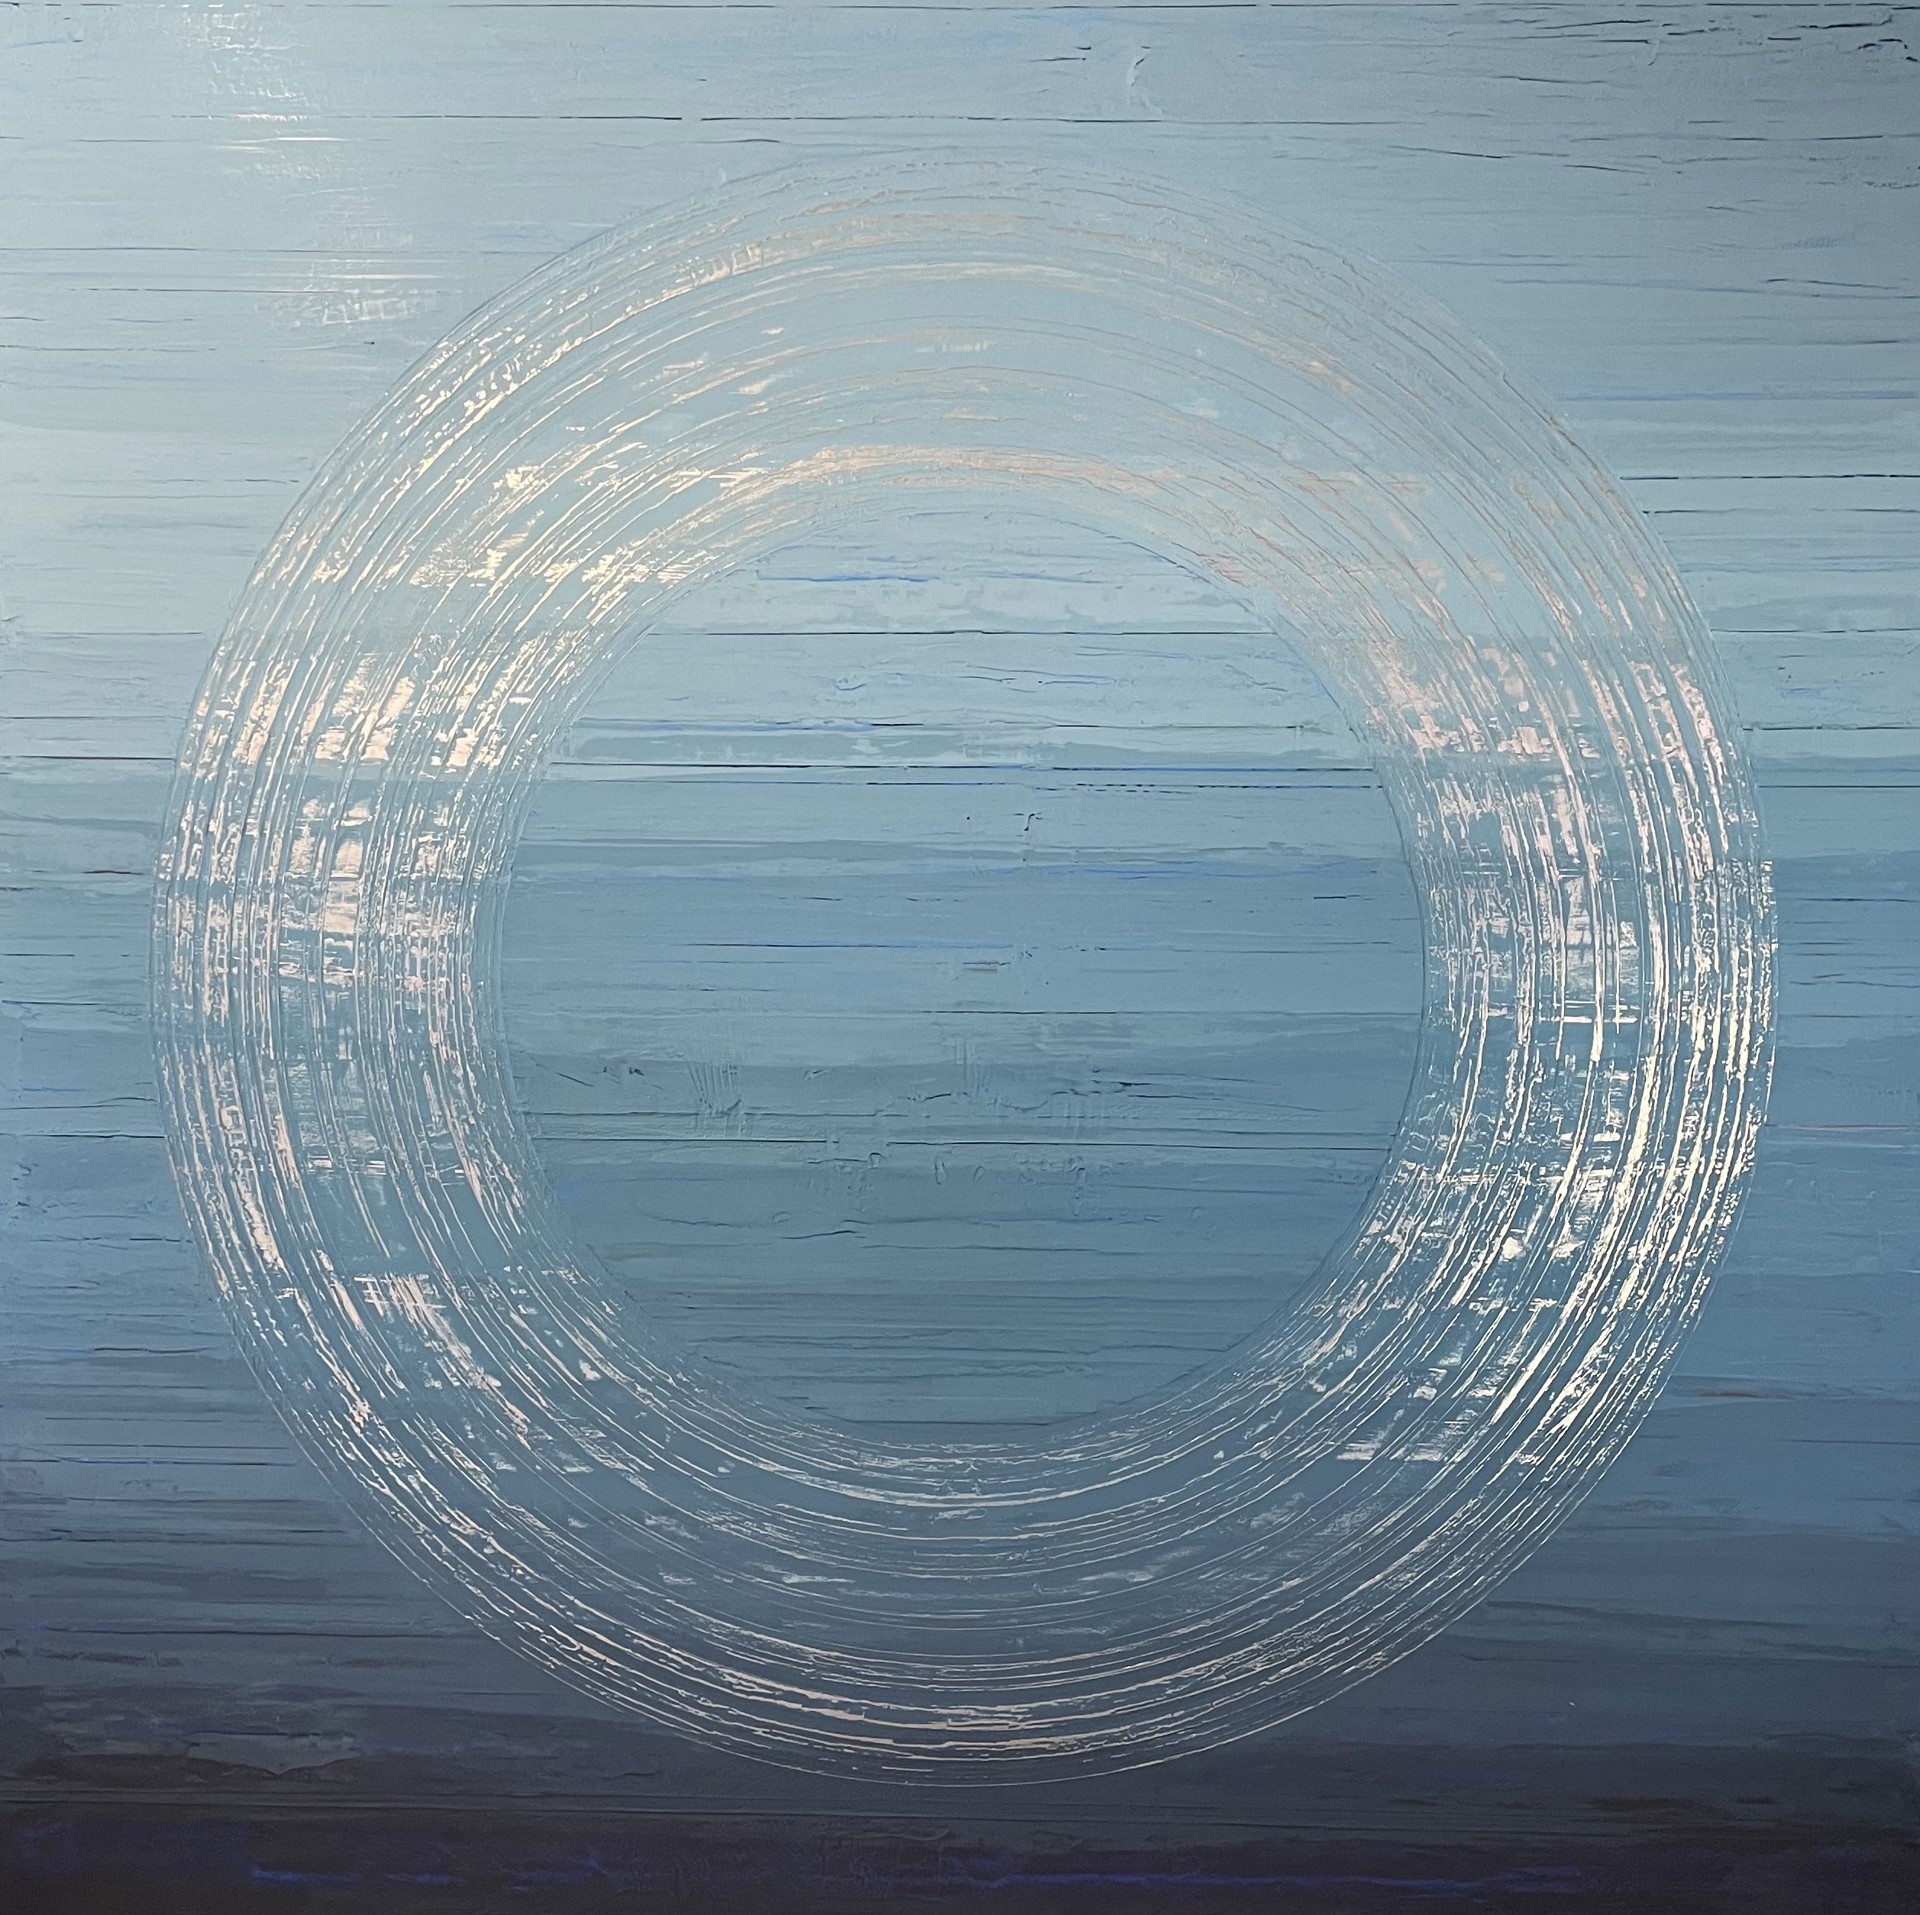 Endless Love is a 72"H x 72"W abstract painting by California artist and painter Stephanie Paige. It is has a blue scale marble plaster background with silver circular striations.